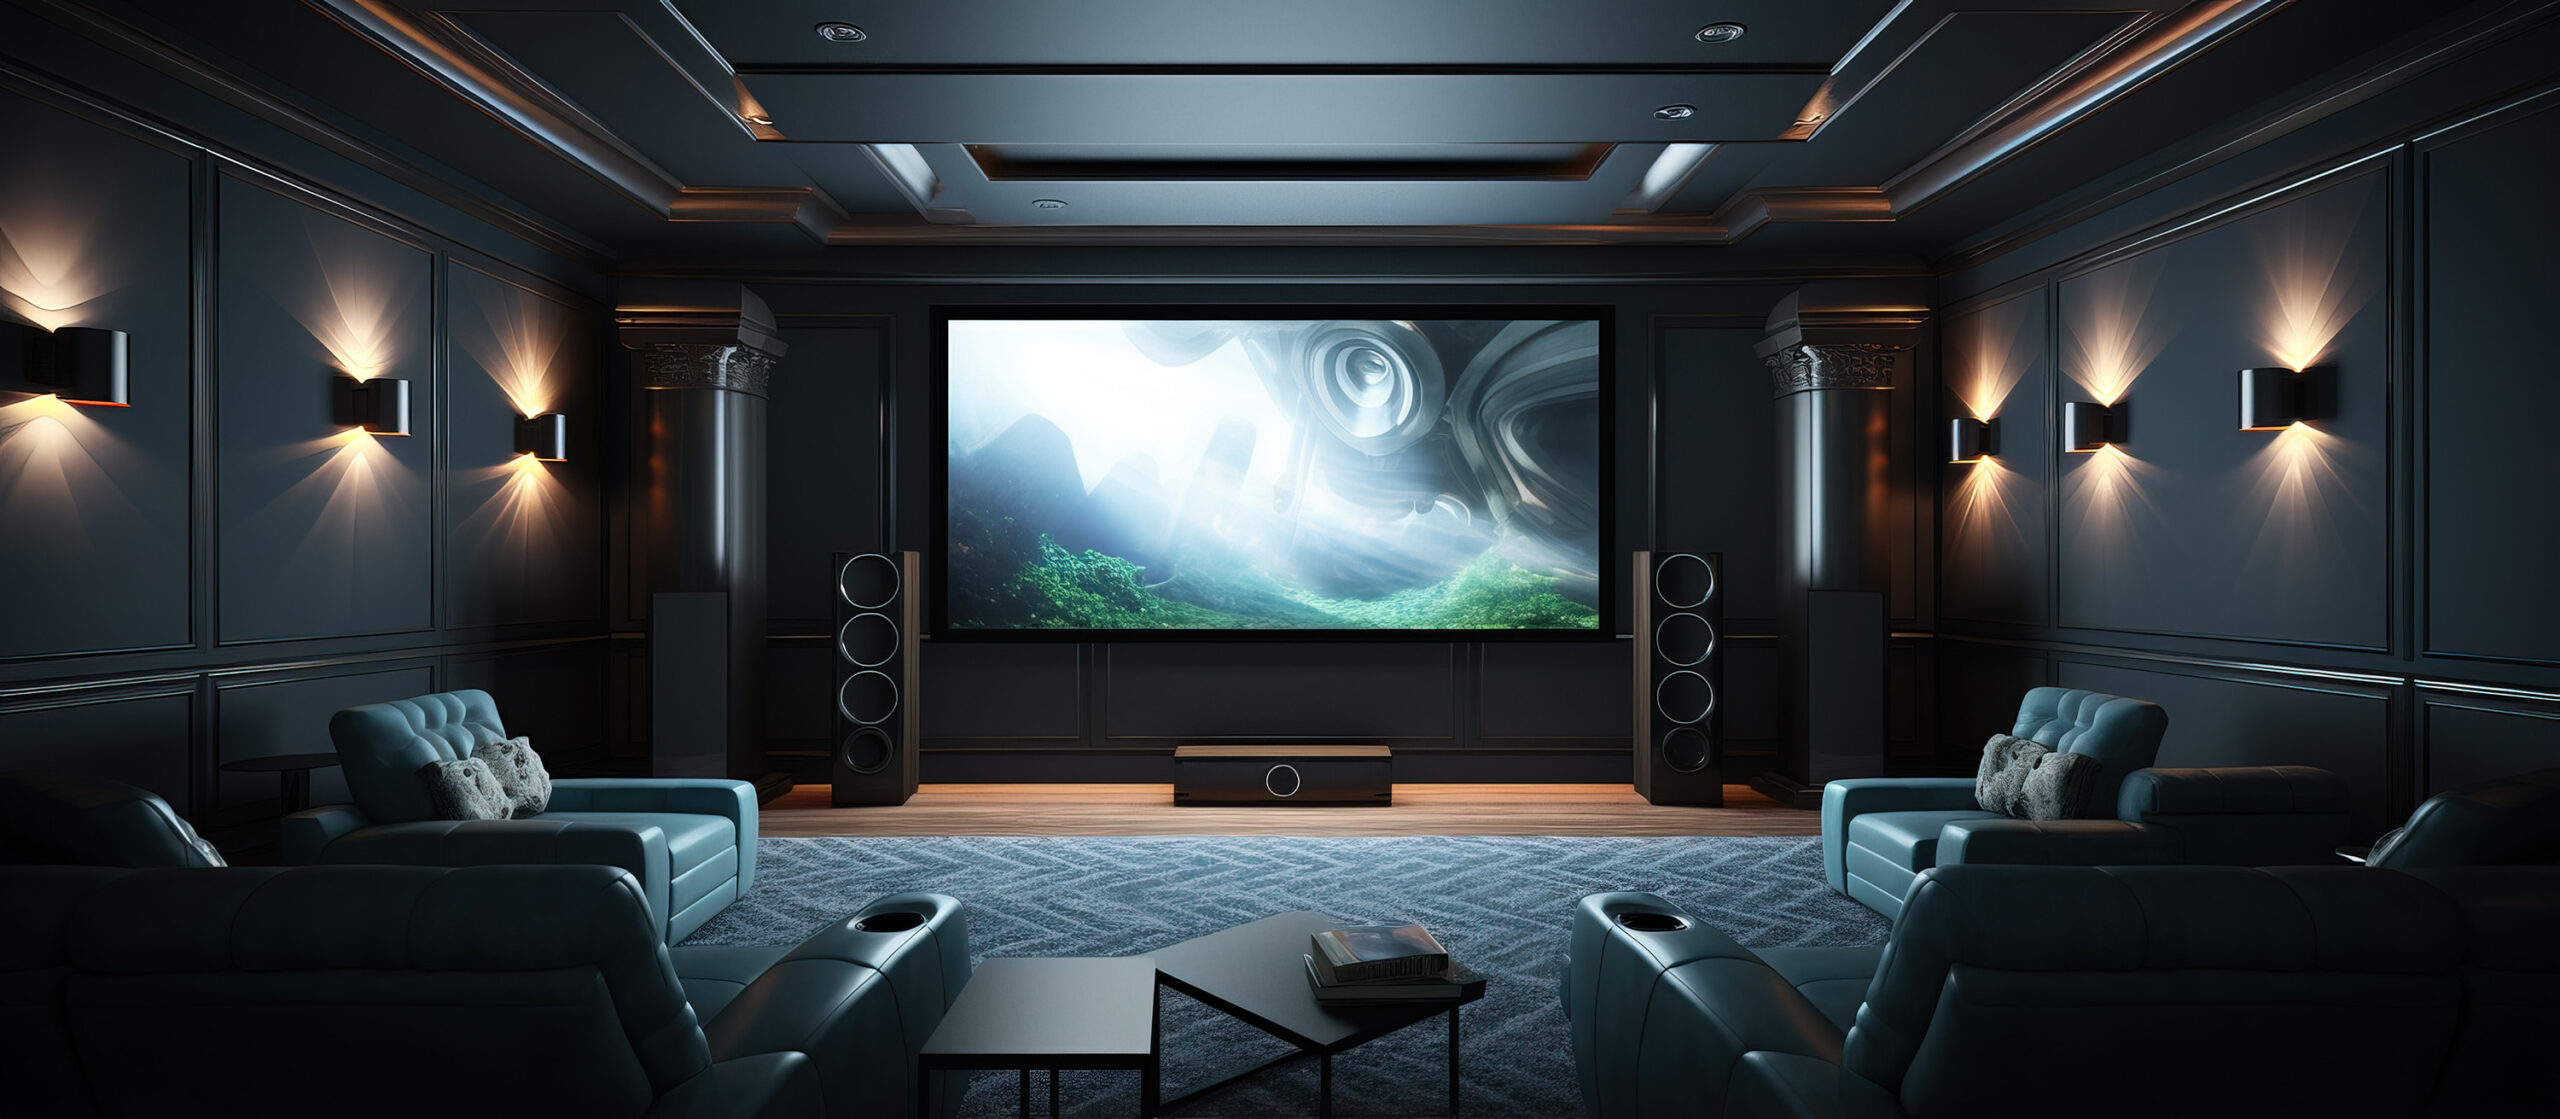 Home theater automation UT Ambiance